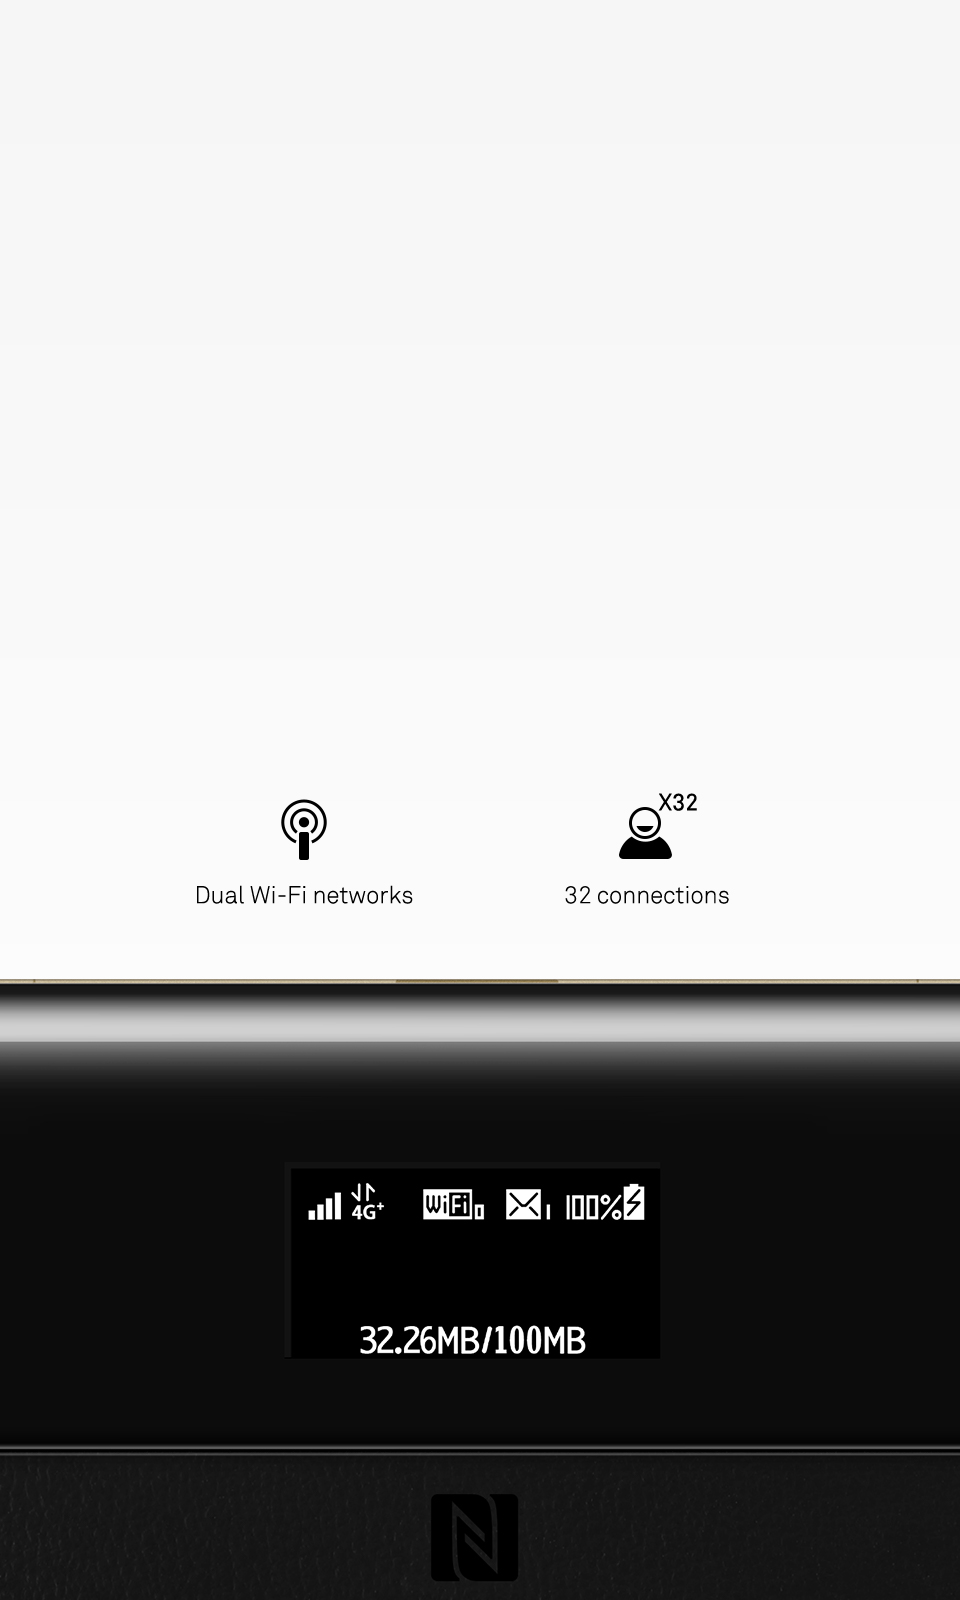 Wi-Fi Dual band 2.4 GHz and 5 GHz